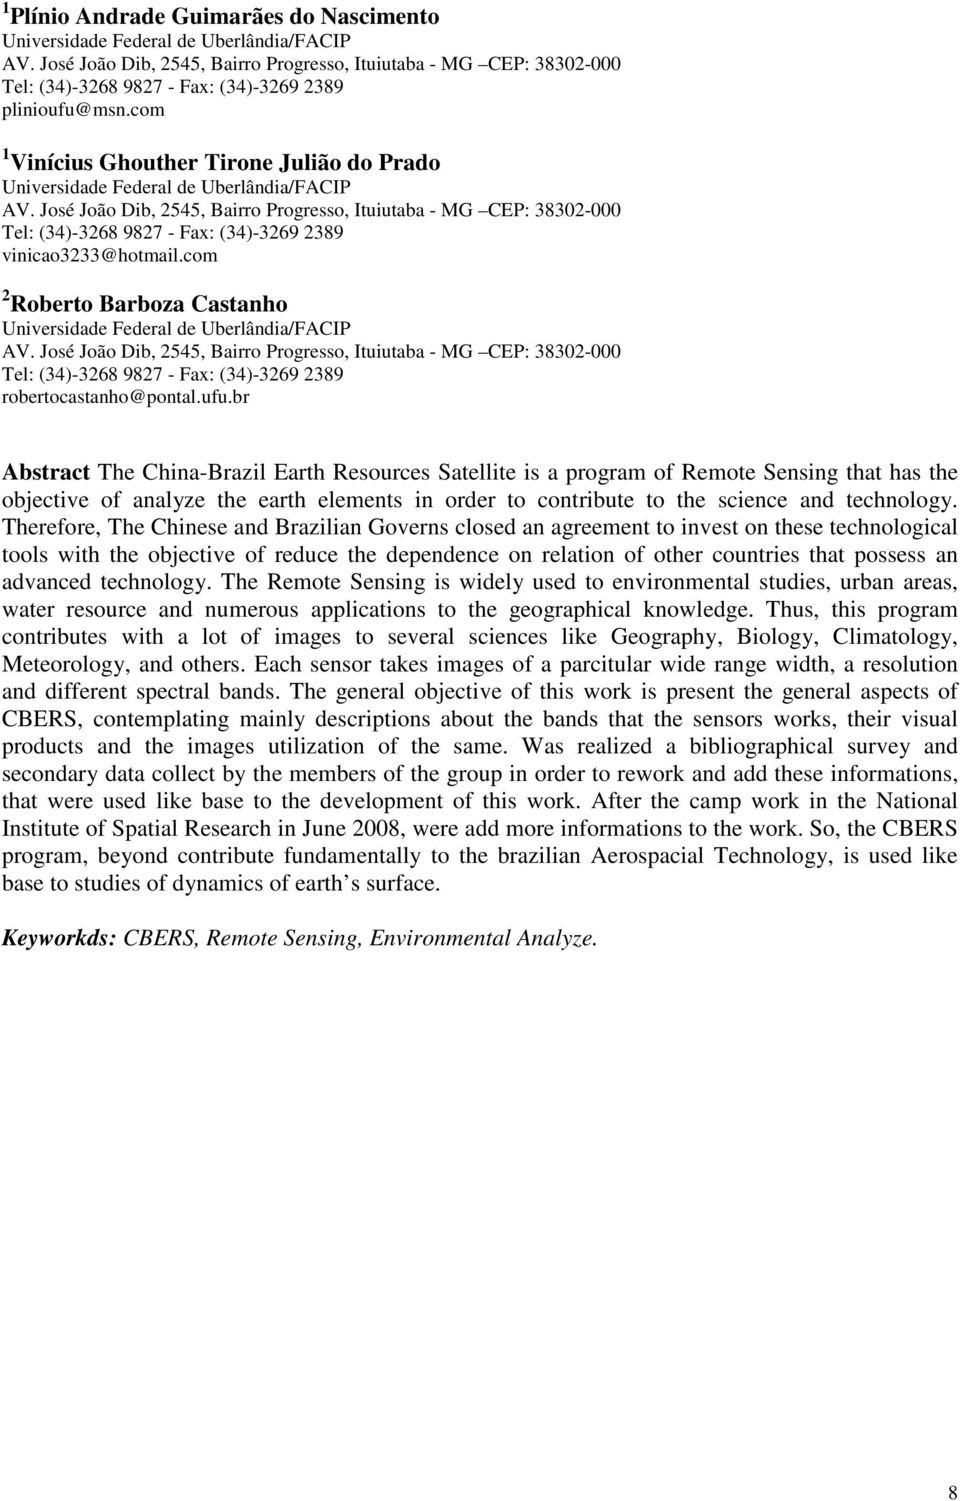 br Abstract The China-Brazil Earth Resources Satellite is a program of Remote Sensing that has the objective of analyze the earth elements in order to contribute to the science and technology.